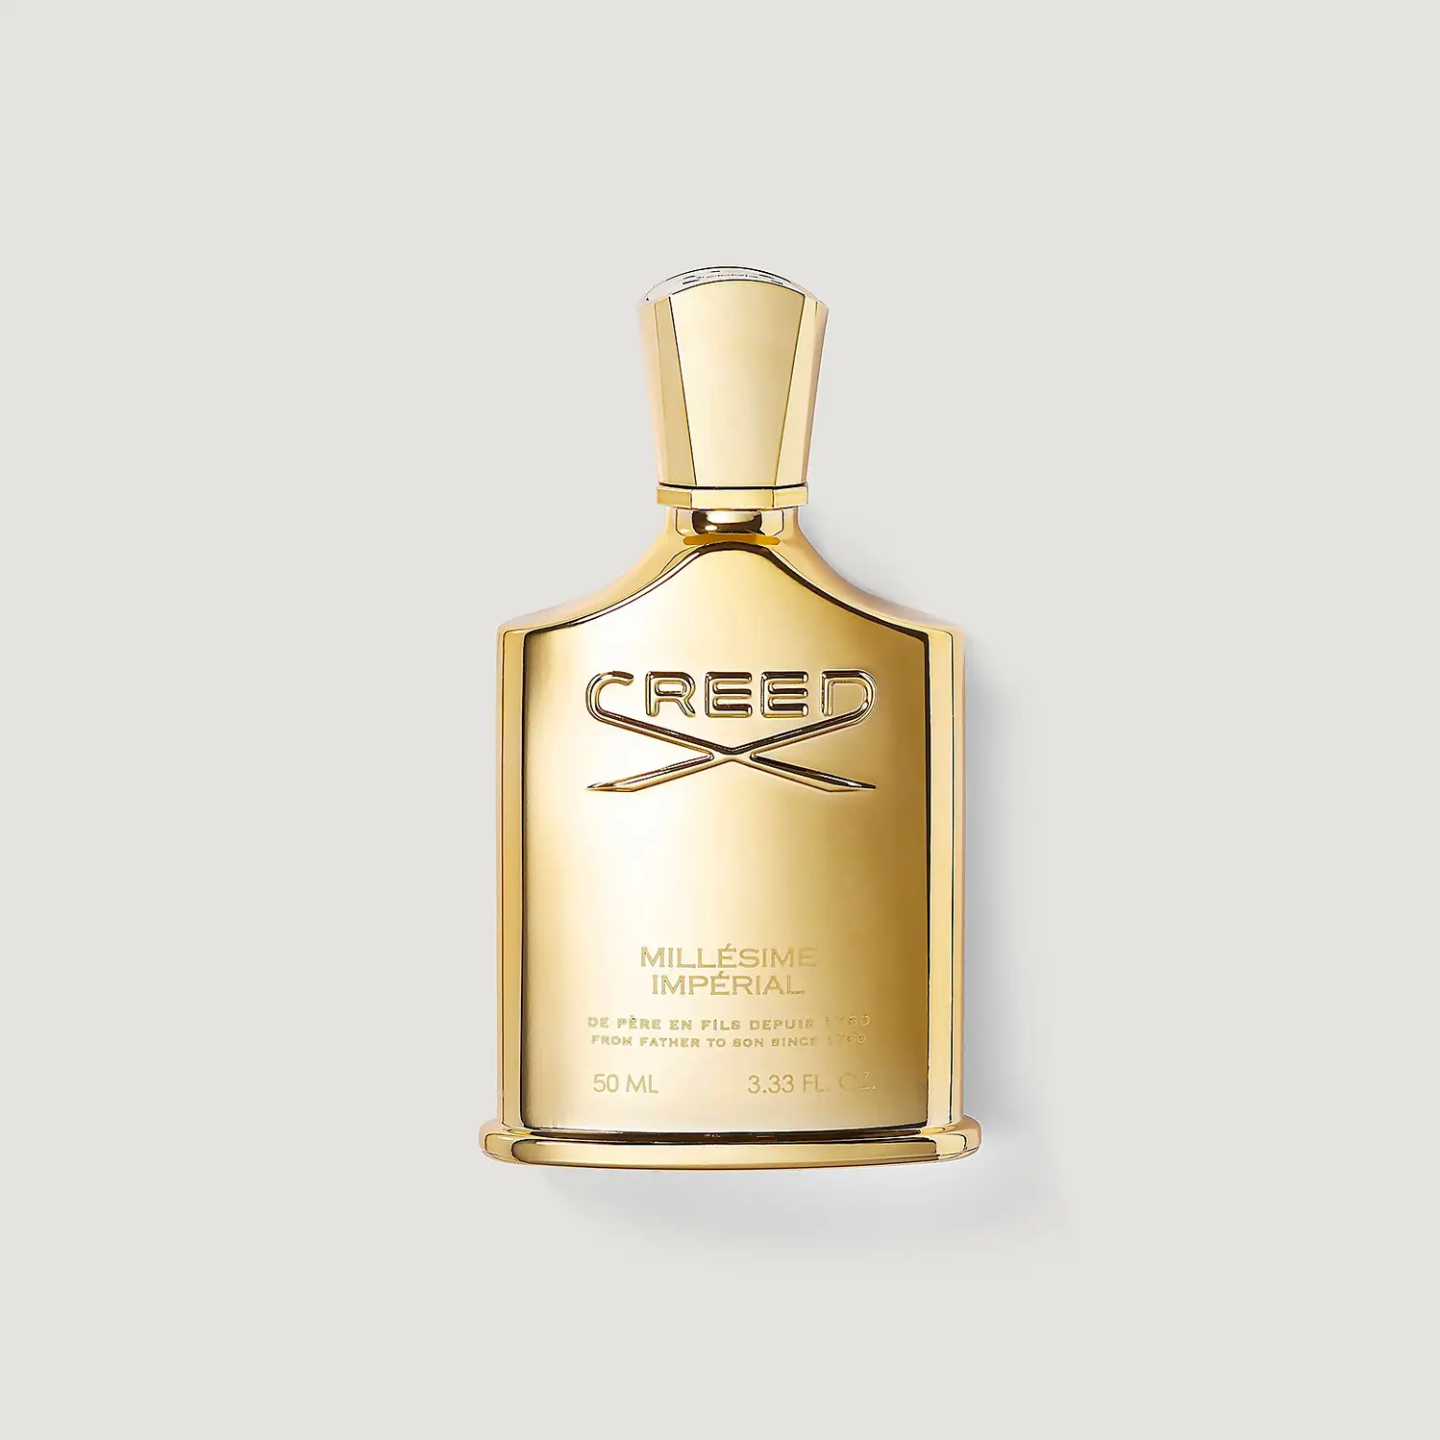 MILLESIME IMPERIAL - CREED